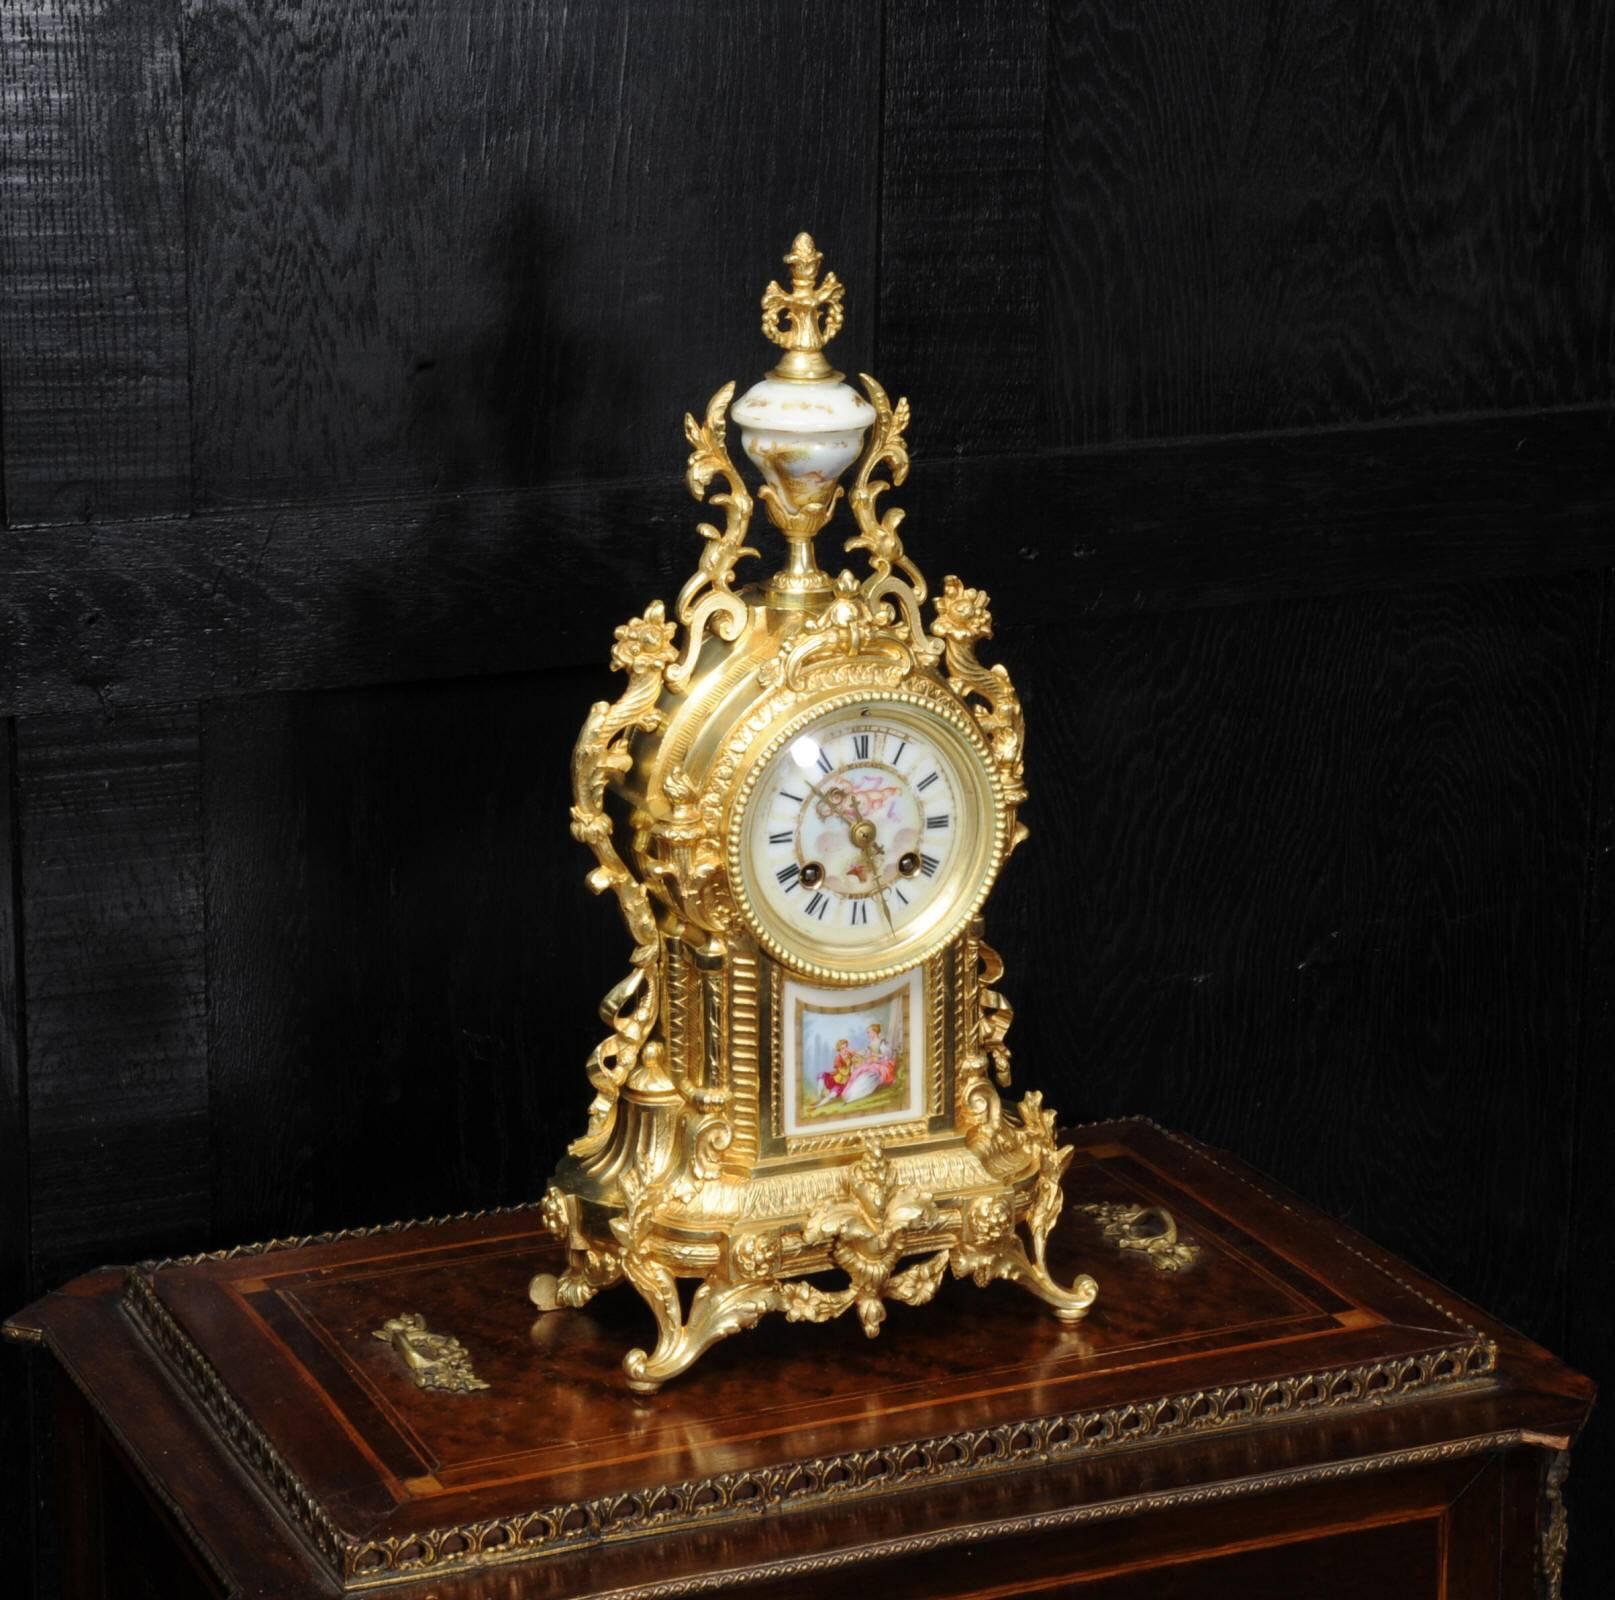 A beautiful antique French ormolu (gilt bronze) clock with exquisitely decorated Sèvres style porcelain panel, urn and dial. The movement is by the distinguished clockmaker Achille Brocot. The style is Louis XVI, decorated with acanthus, scrolling